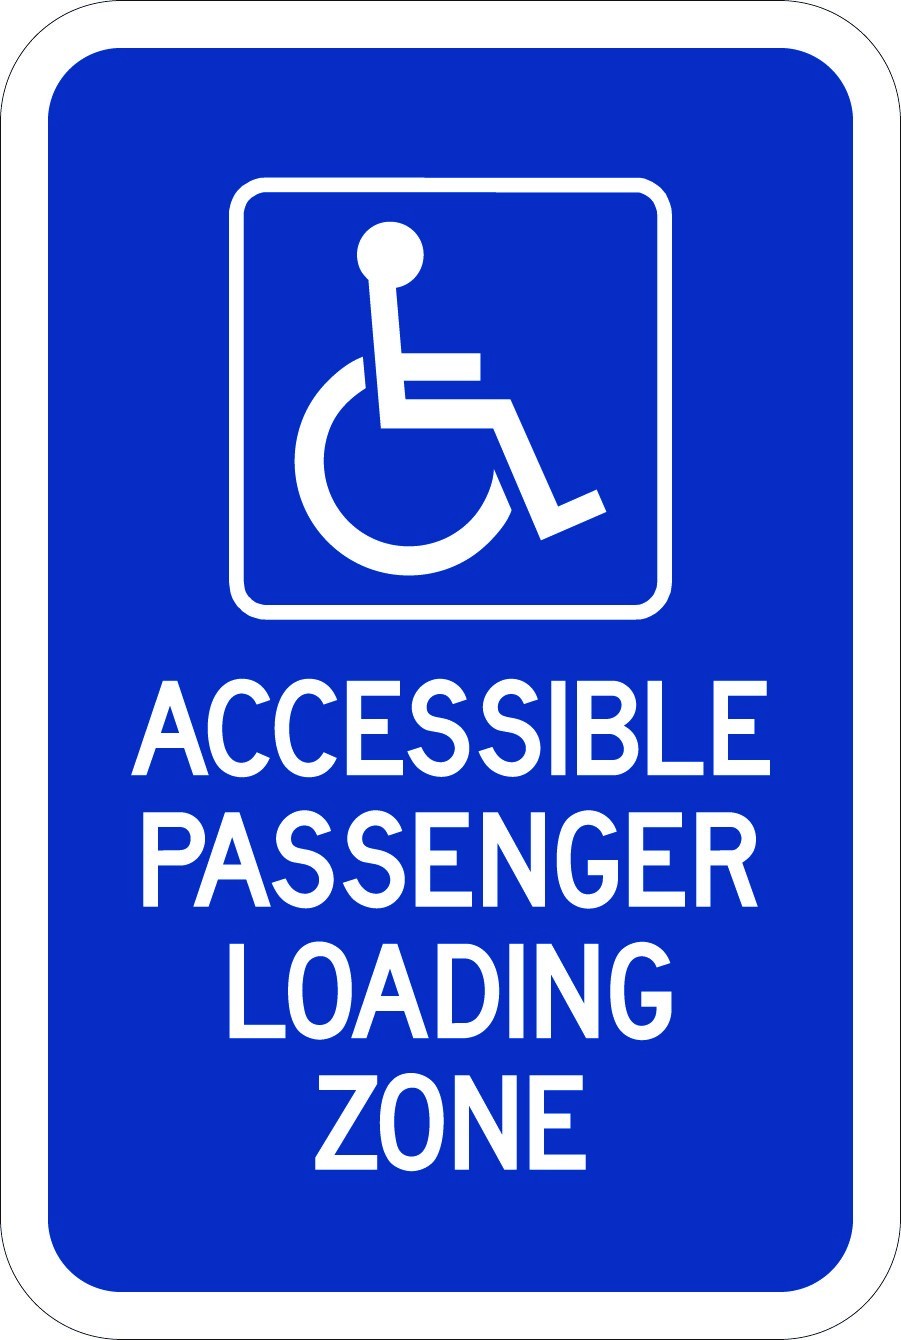 AR-731 - Accessible Passenger Loading Zone Sign